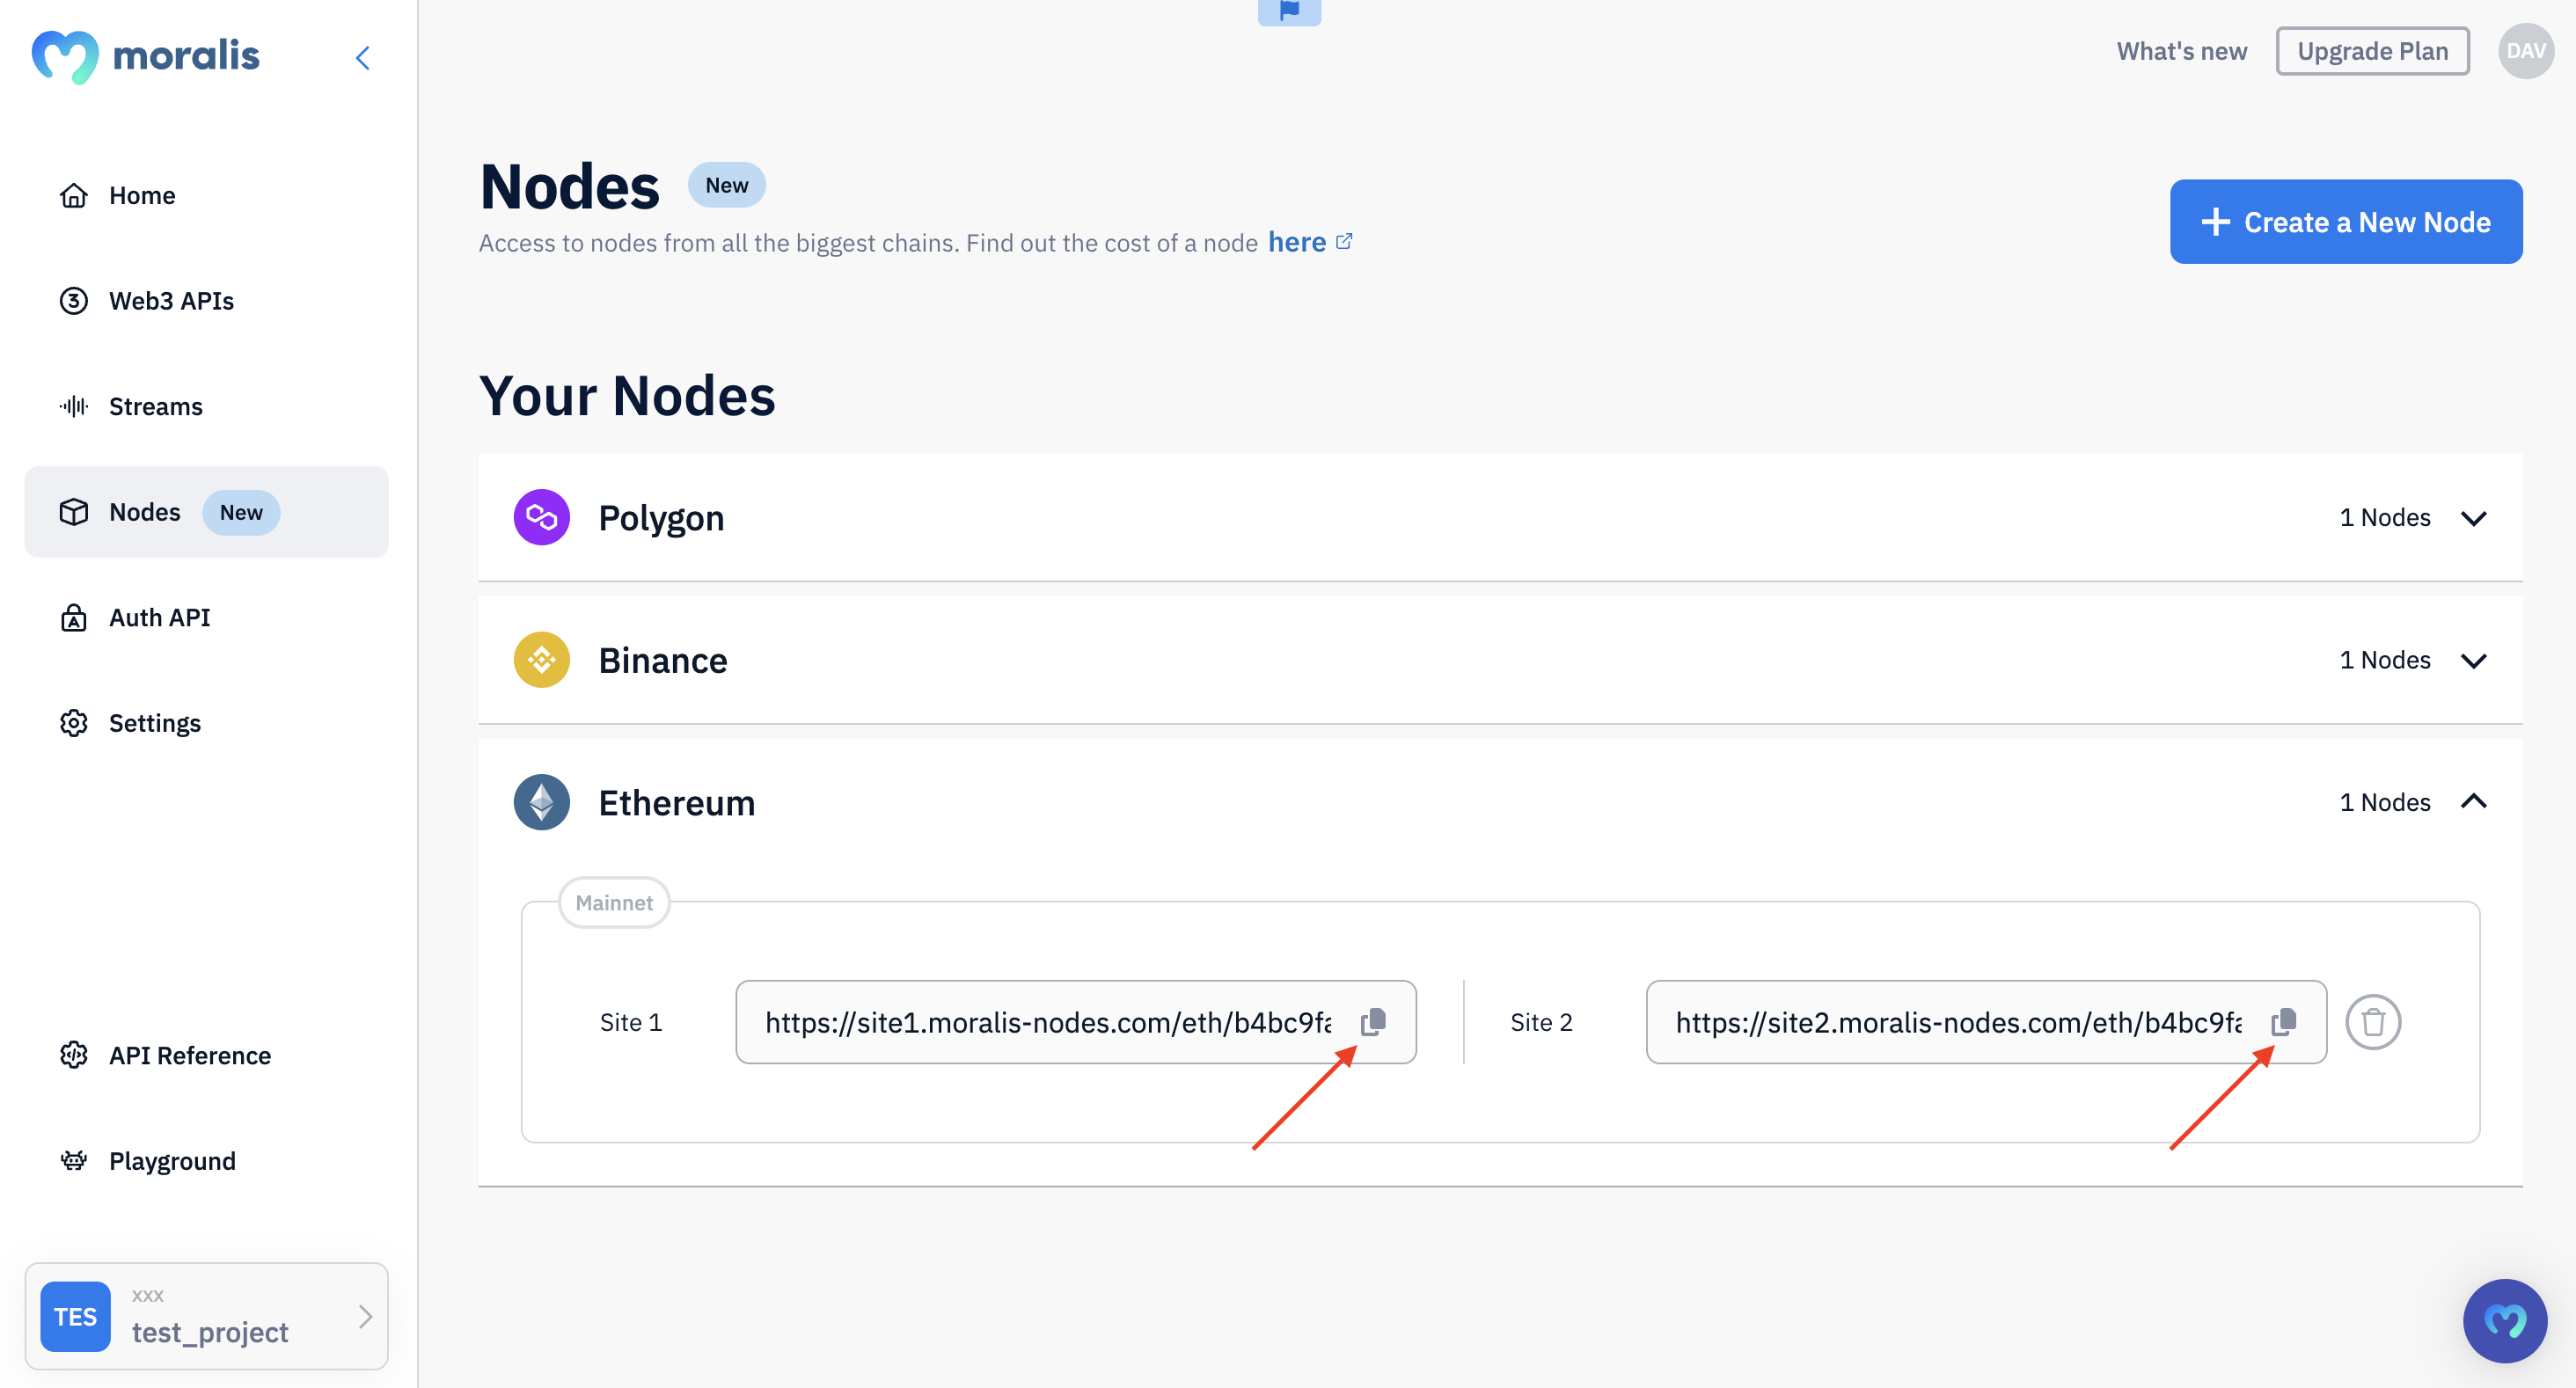 Step 3 - Copy one of your node URLs and integrate it into your dapp: